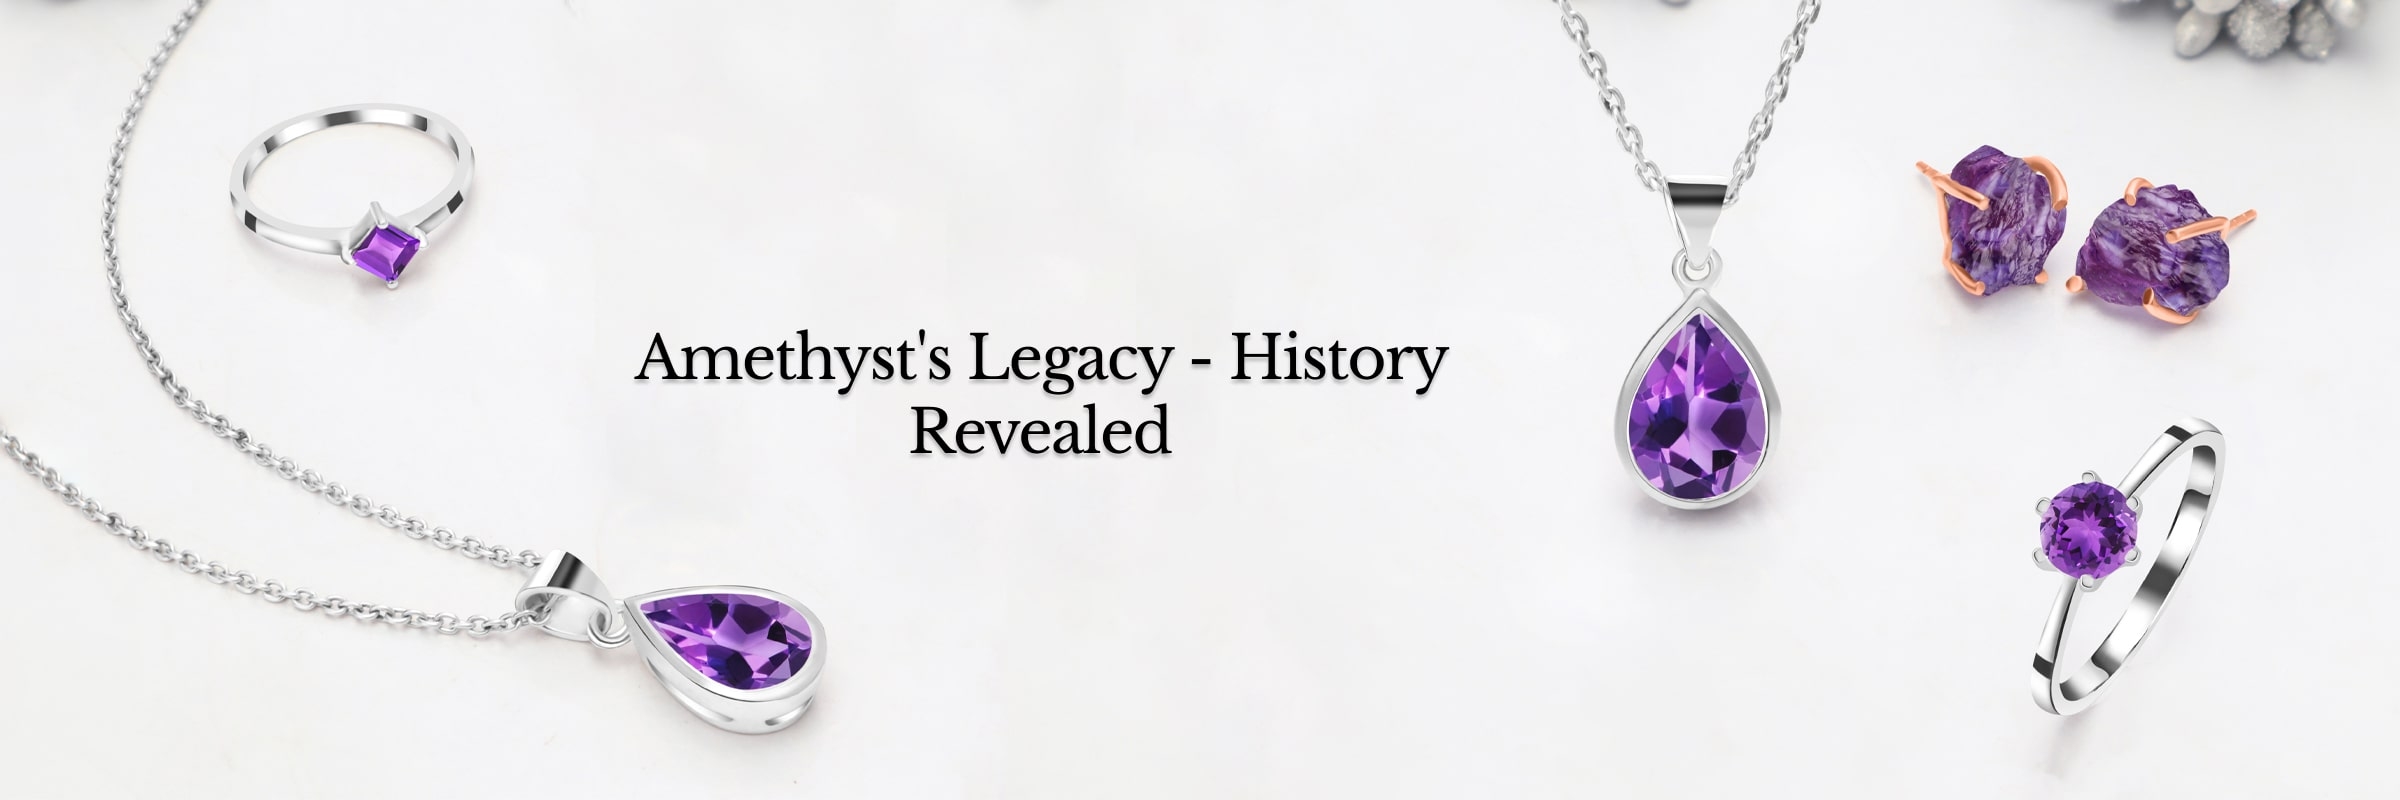 Legends and History associated with Amethyst